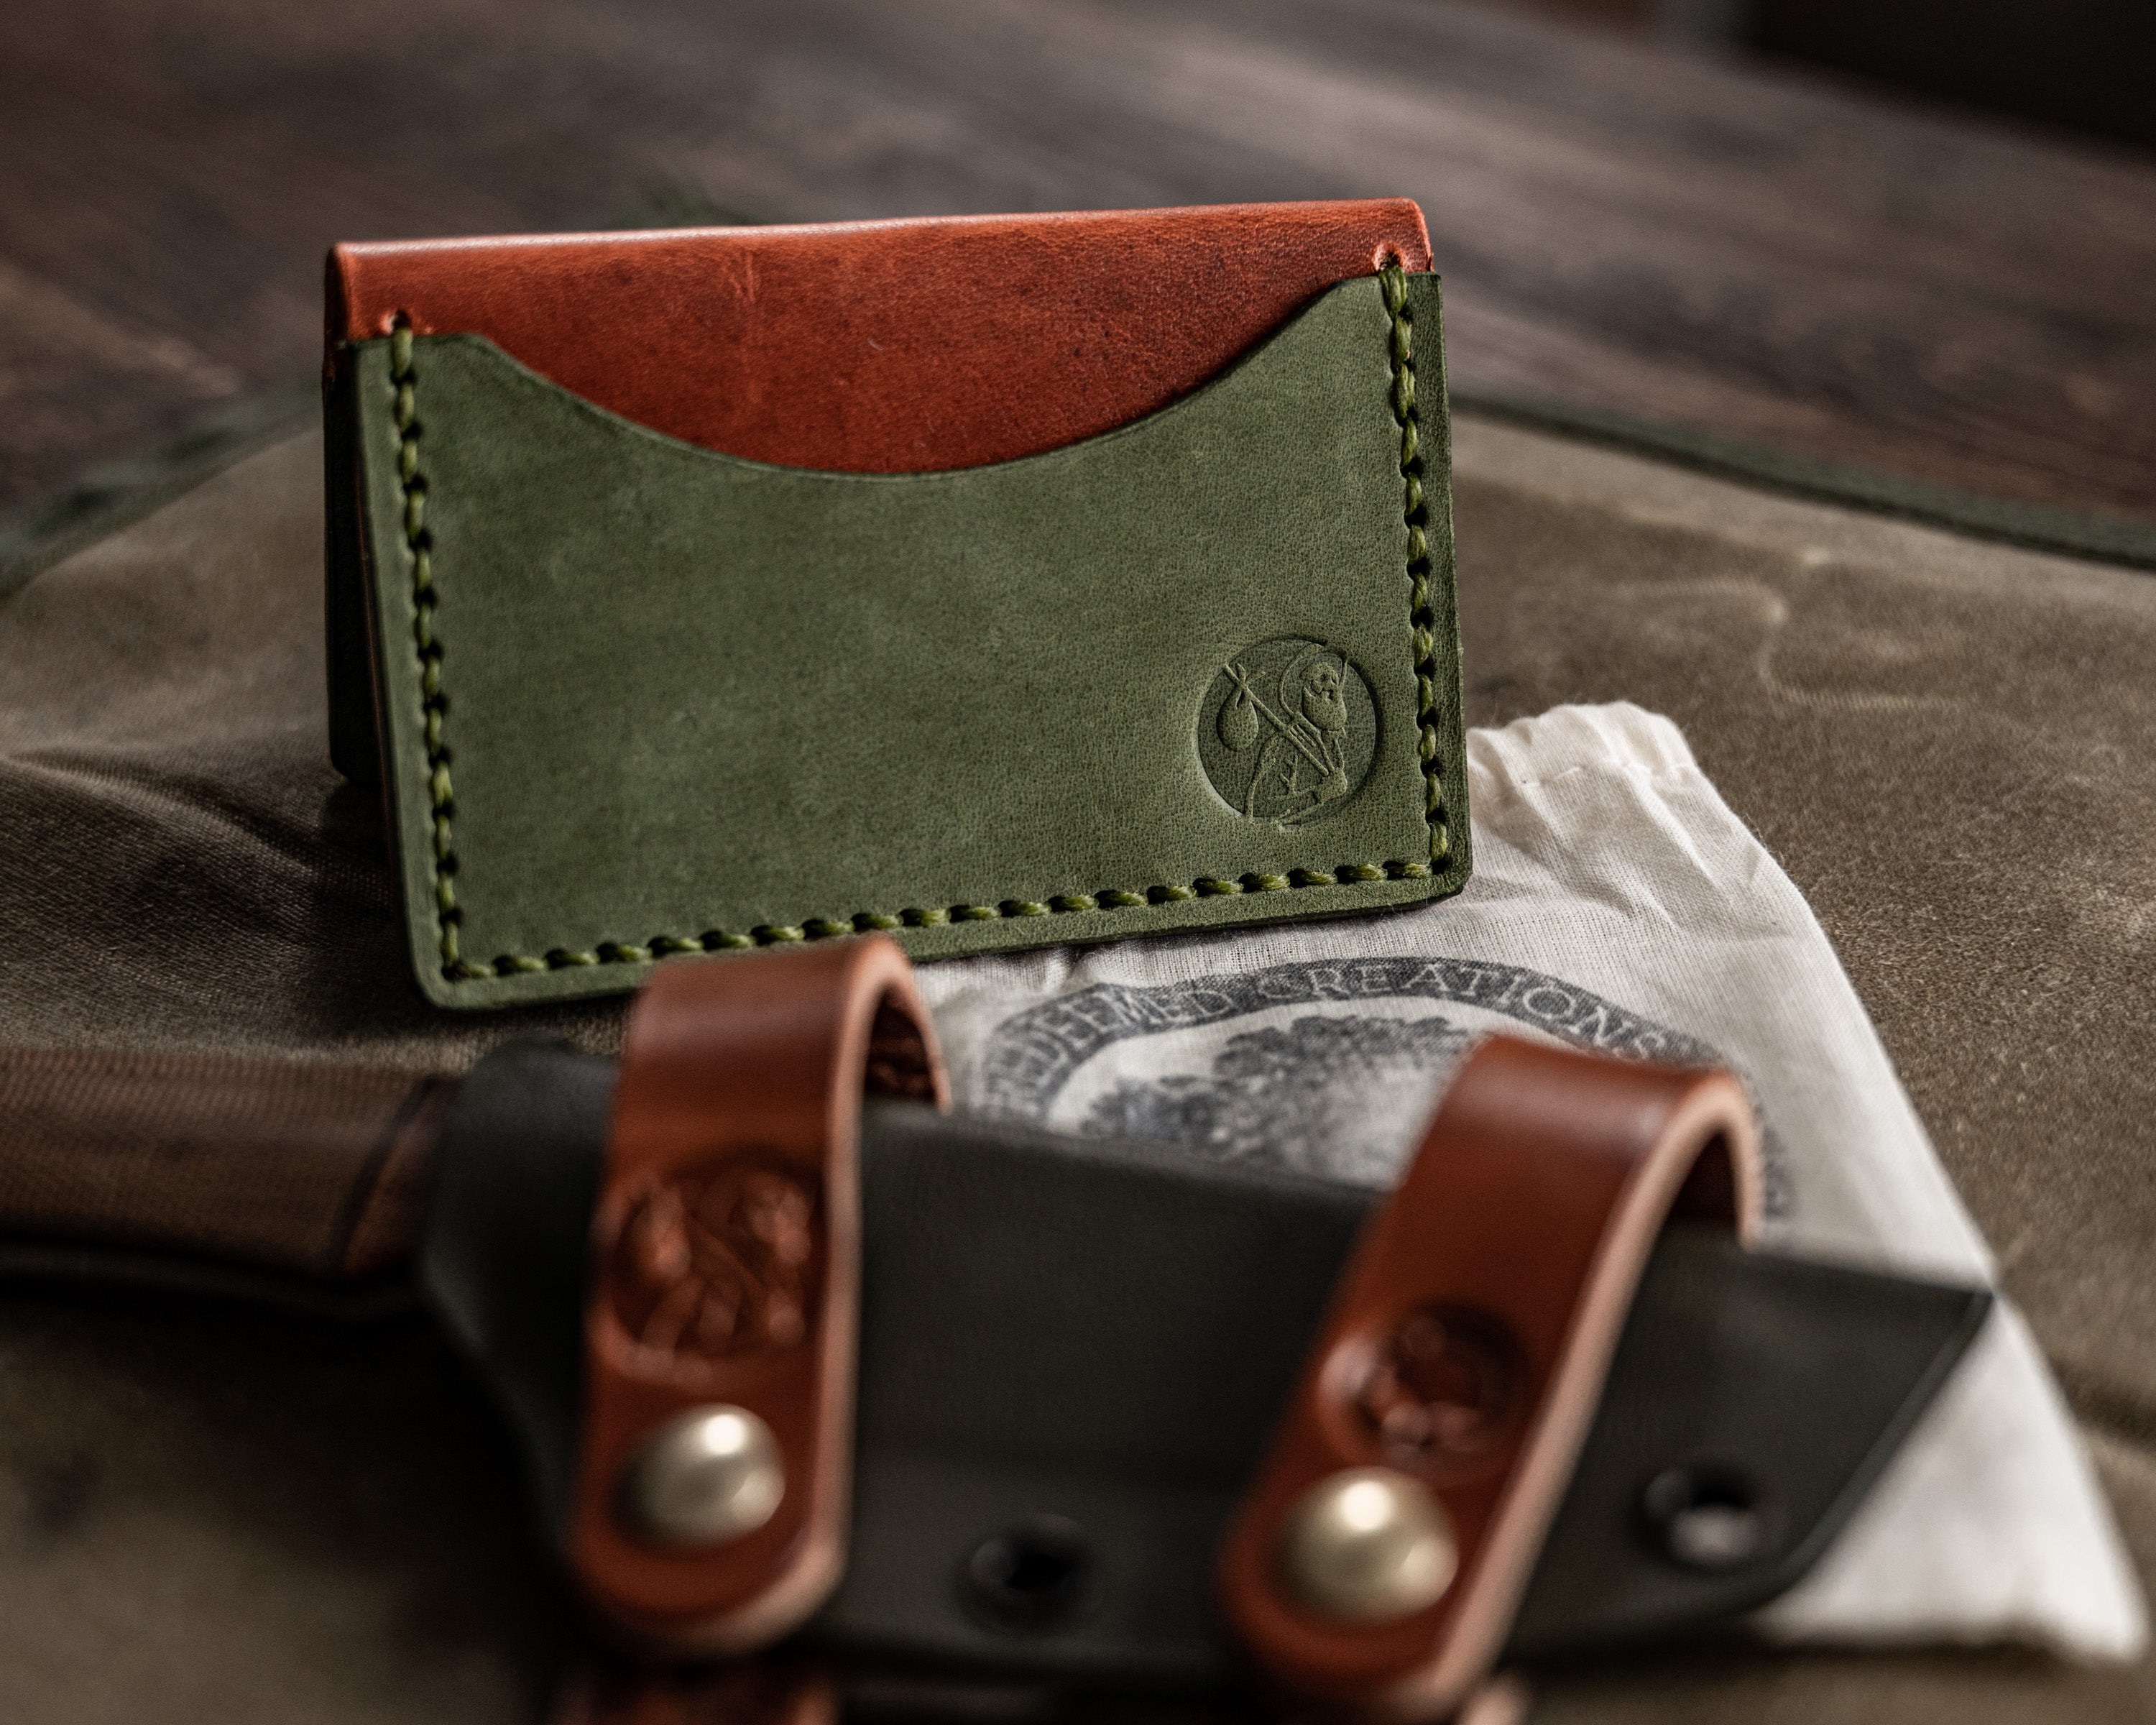 Top view of a brown and green bifold wallet in a &quot;tent&quot; shape on top of a canvas tray with a sheath and cloth bag also in photo  